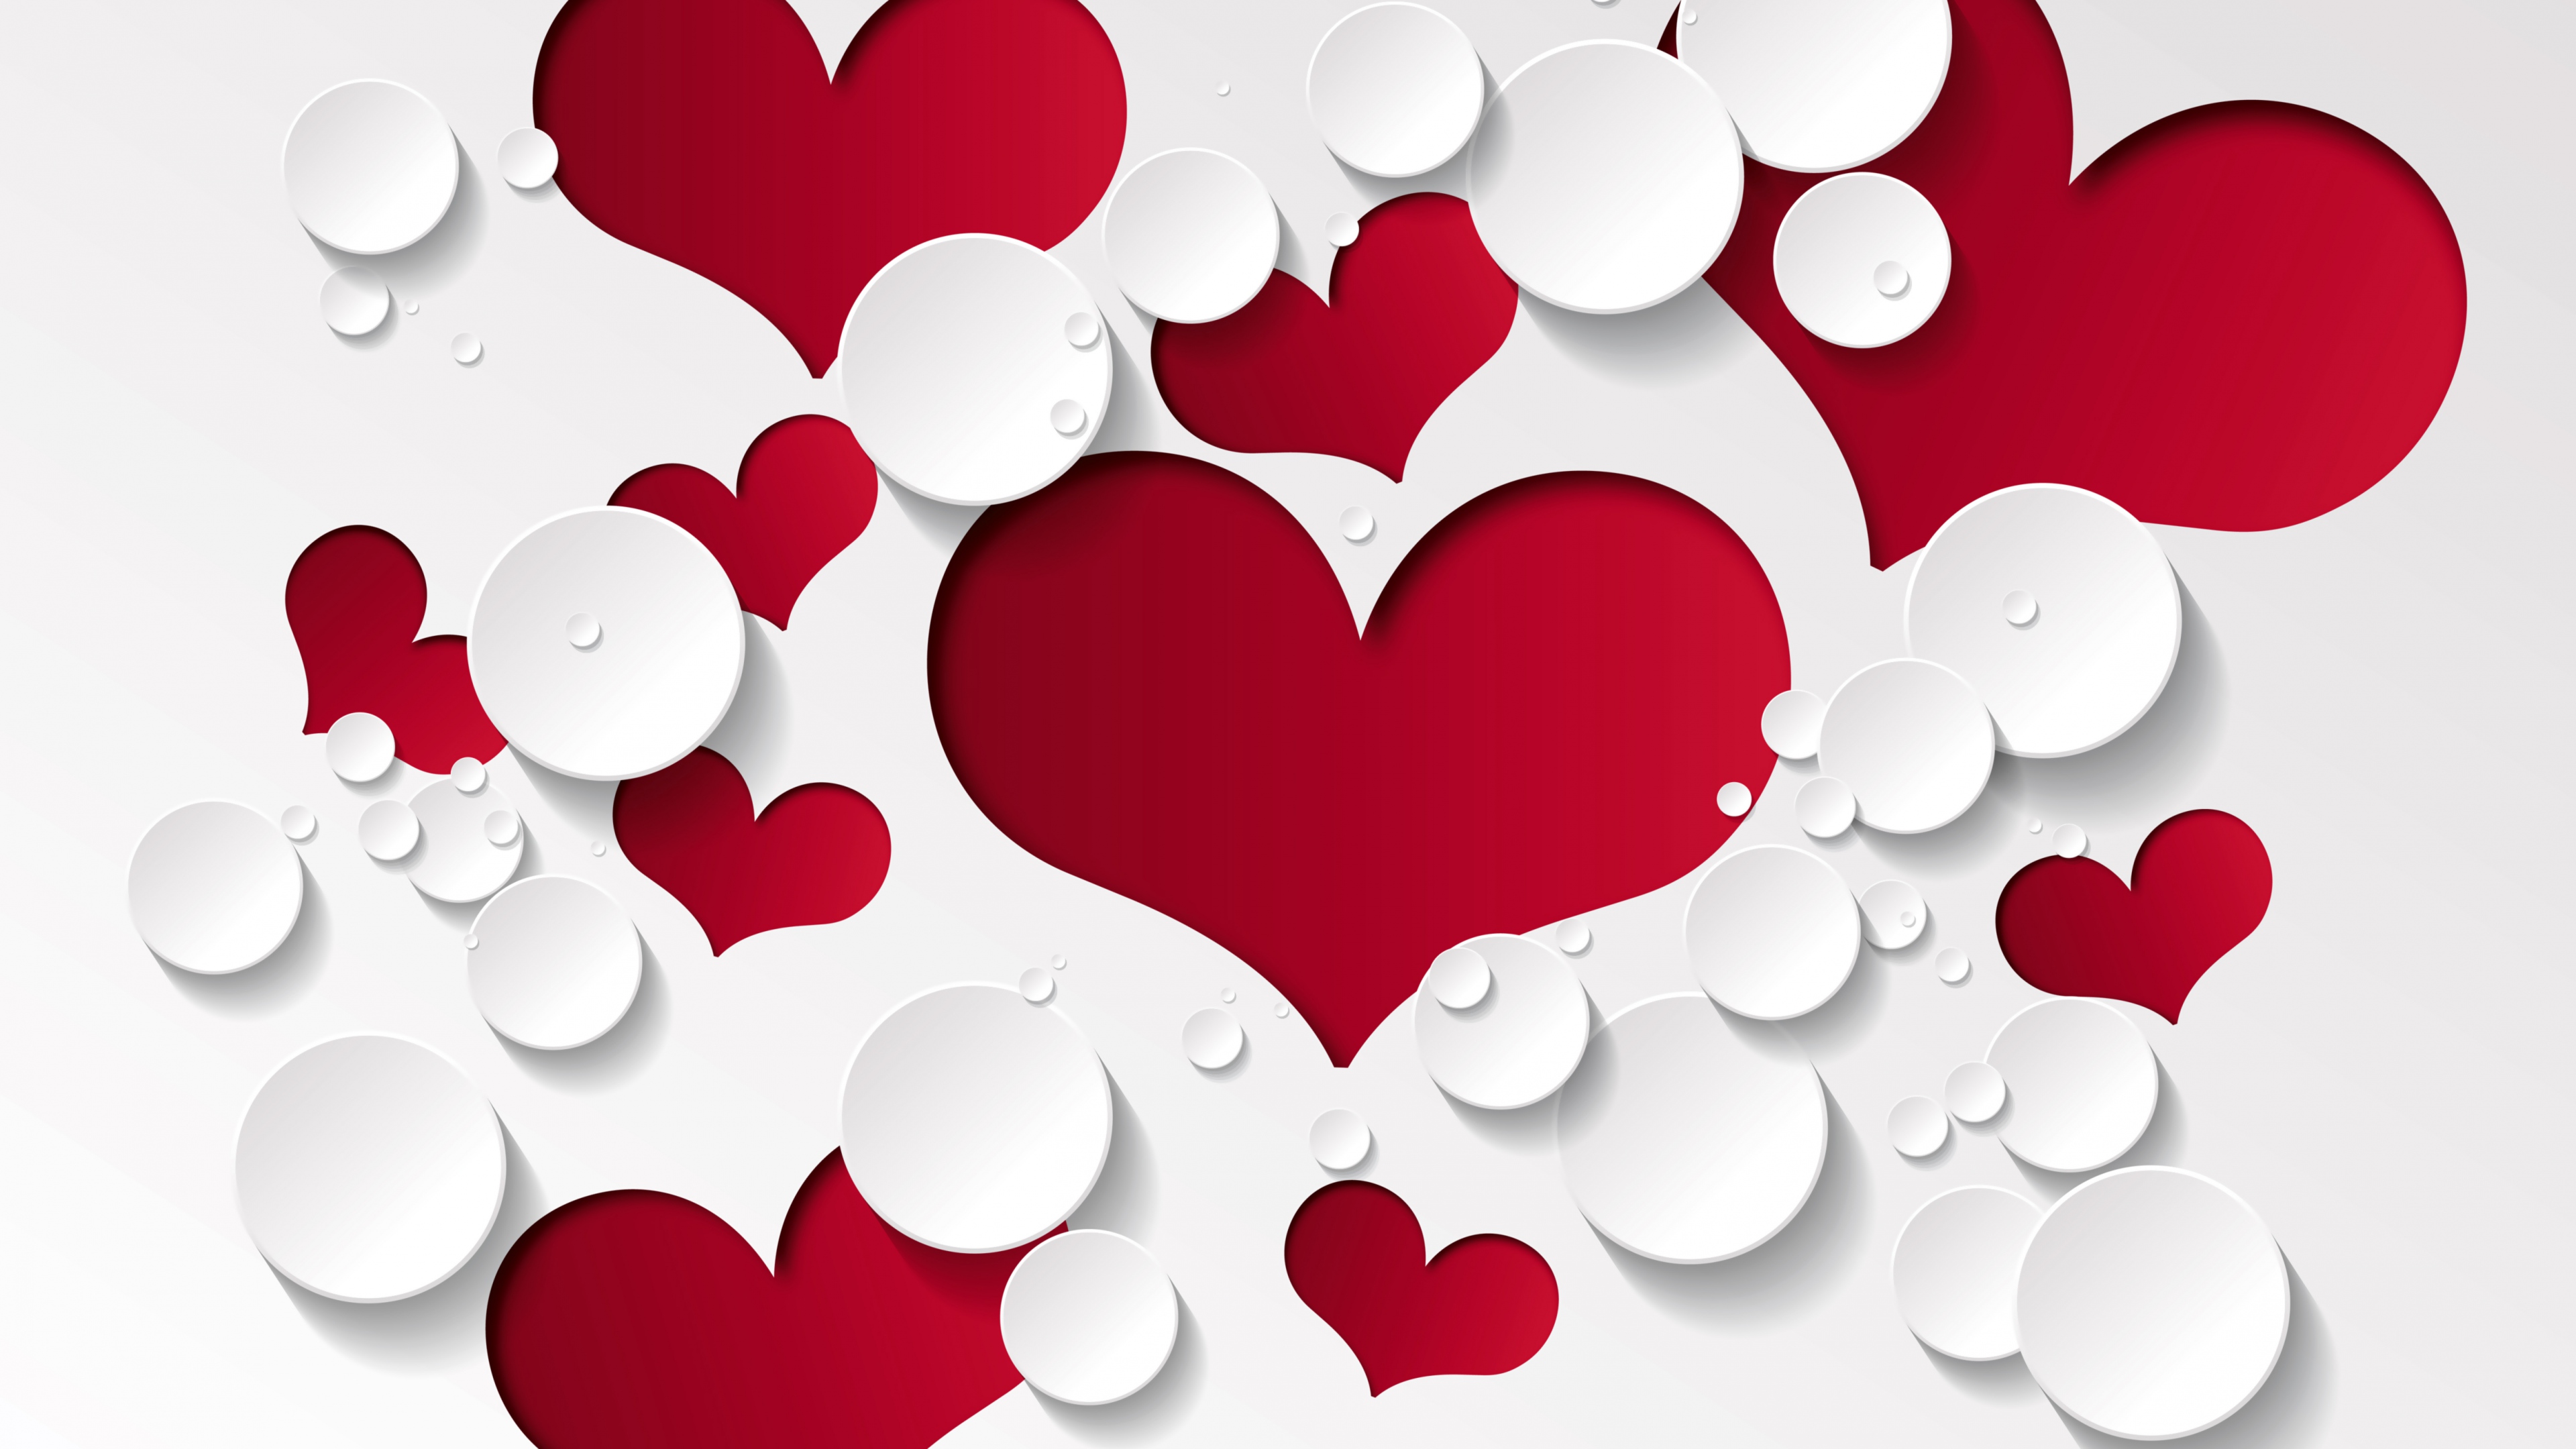 Free Heart Wallpaper Pictures - Background Heart Images Hd - HD Wallpaper 